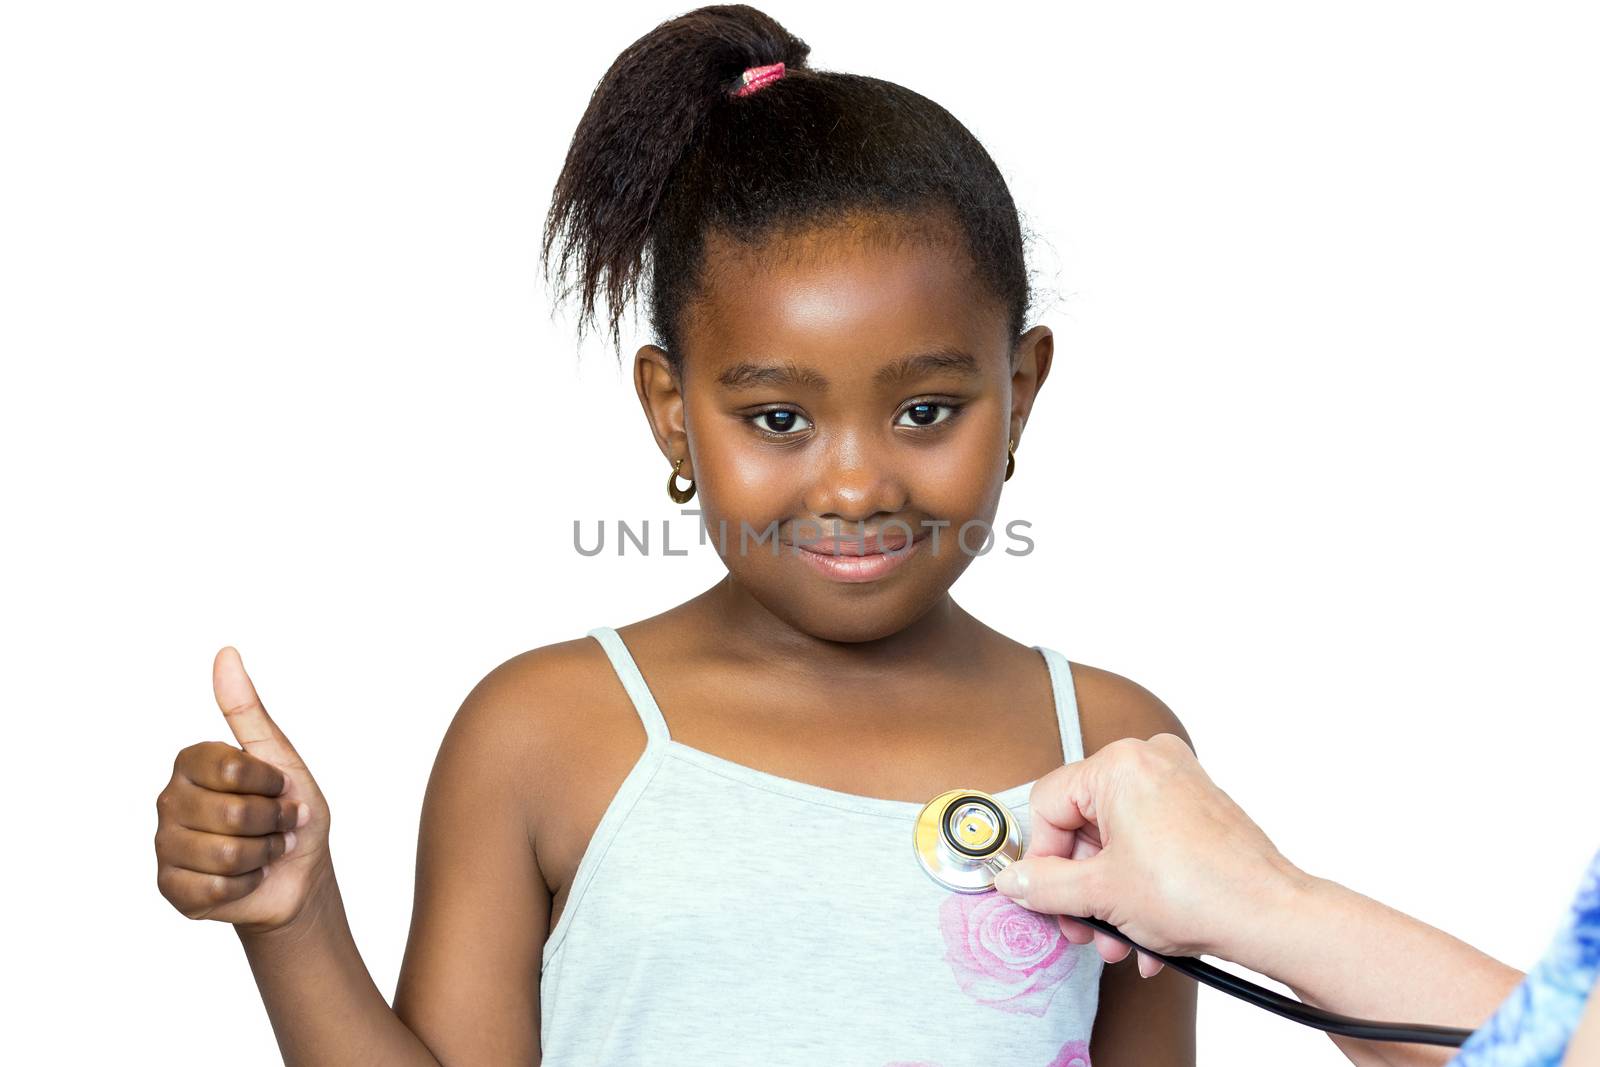 Close up portrait of cute little african girl having heartbeat taken.Hand positioning stethoscope against chest.Kid doing thumbs up Isolated on white background.